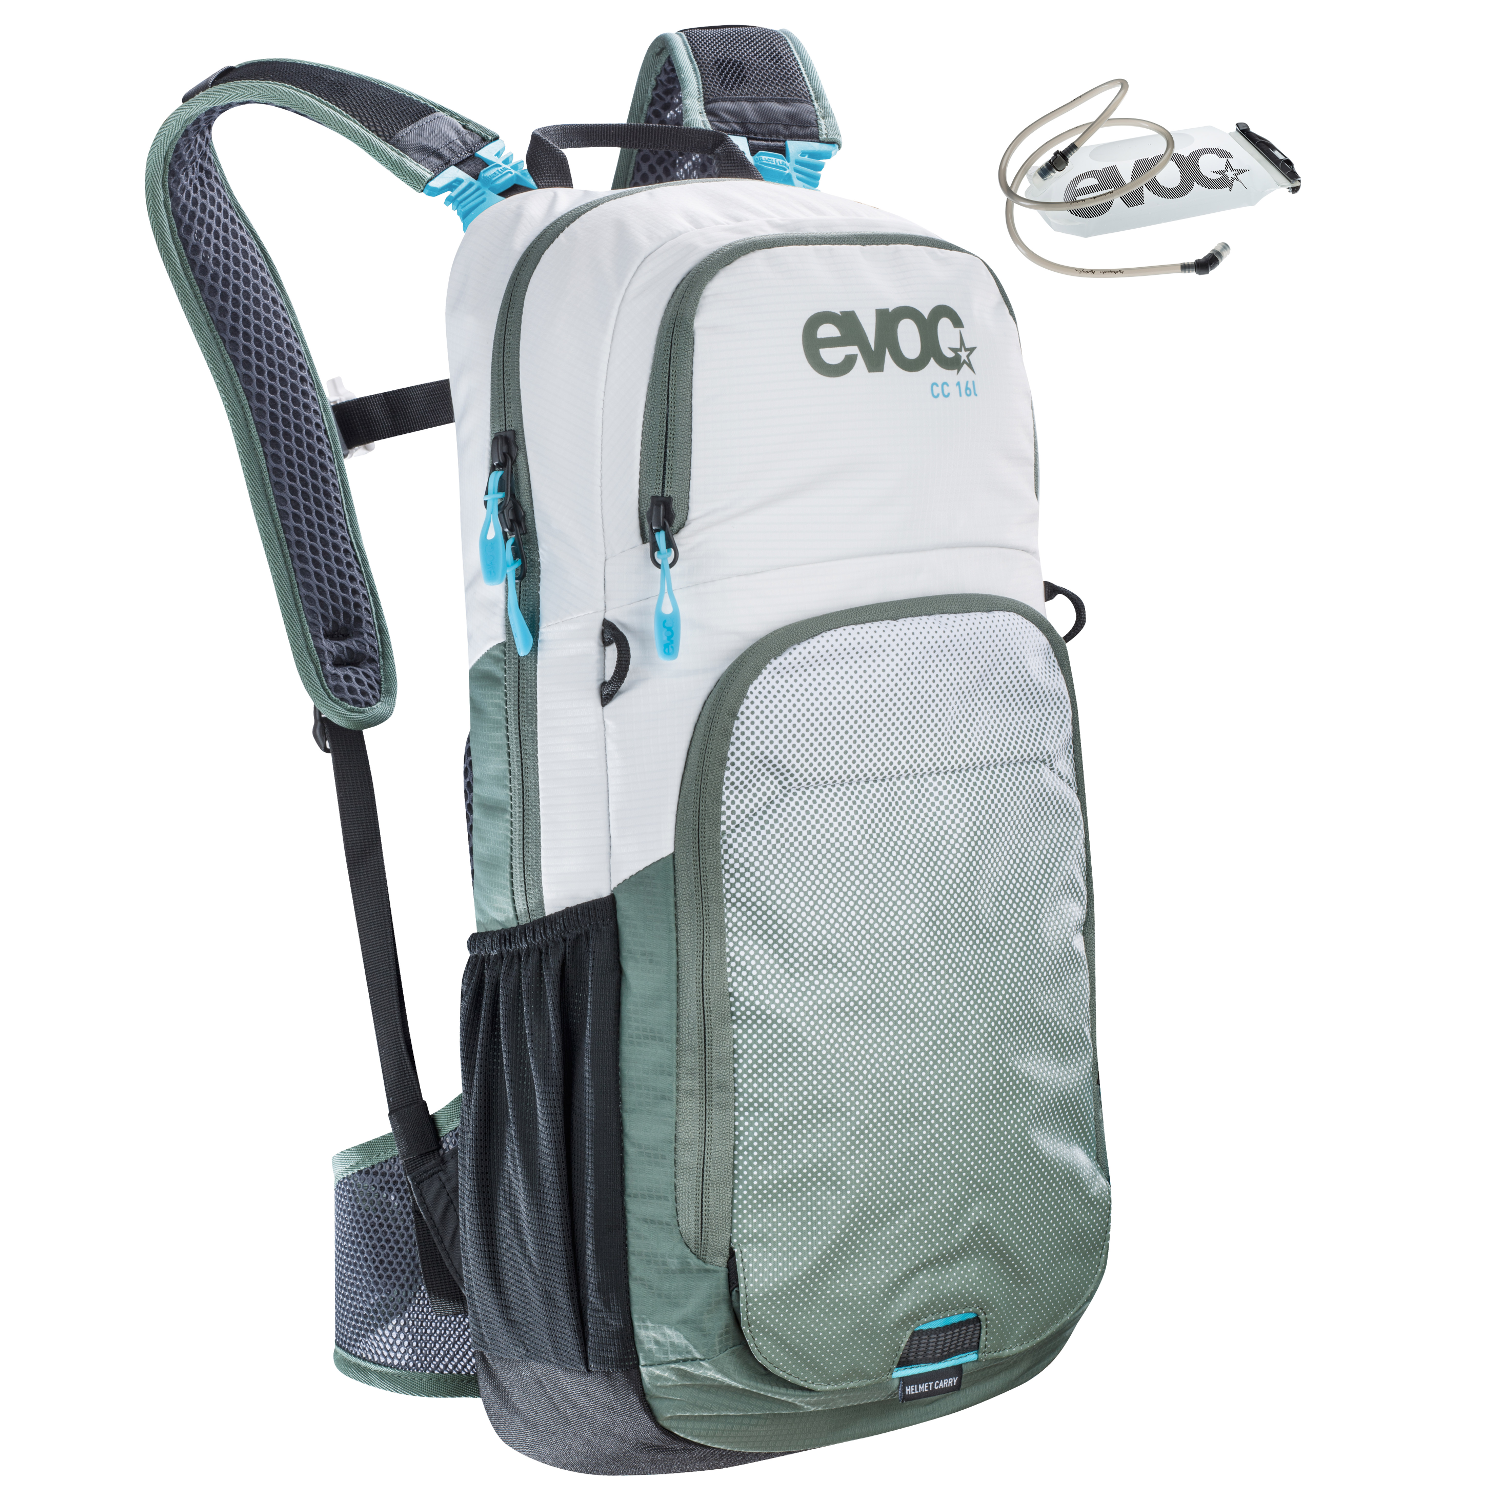 Evoc Backpack with Hydration System Cross Country White/Olive, 16 Liter